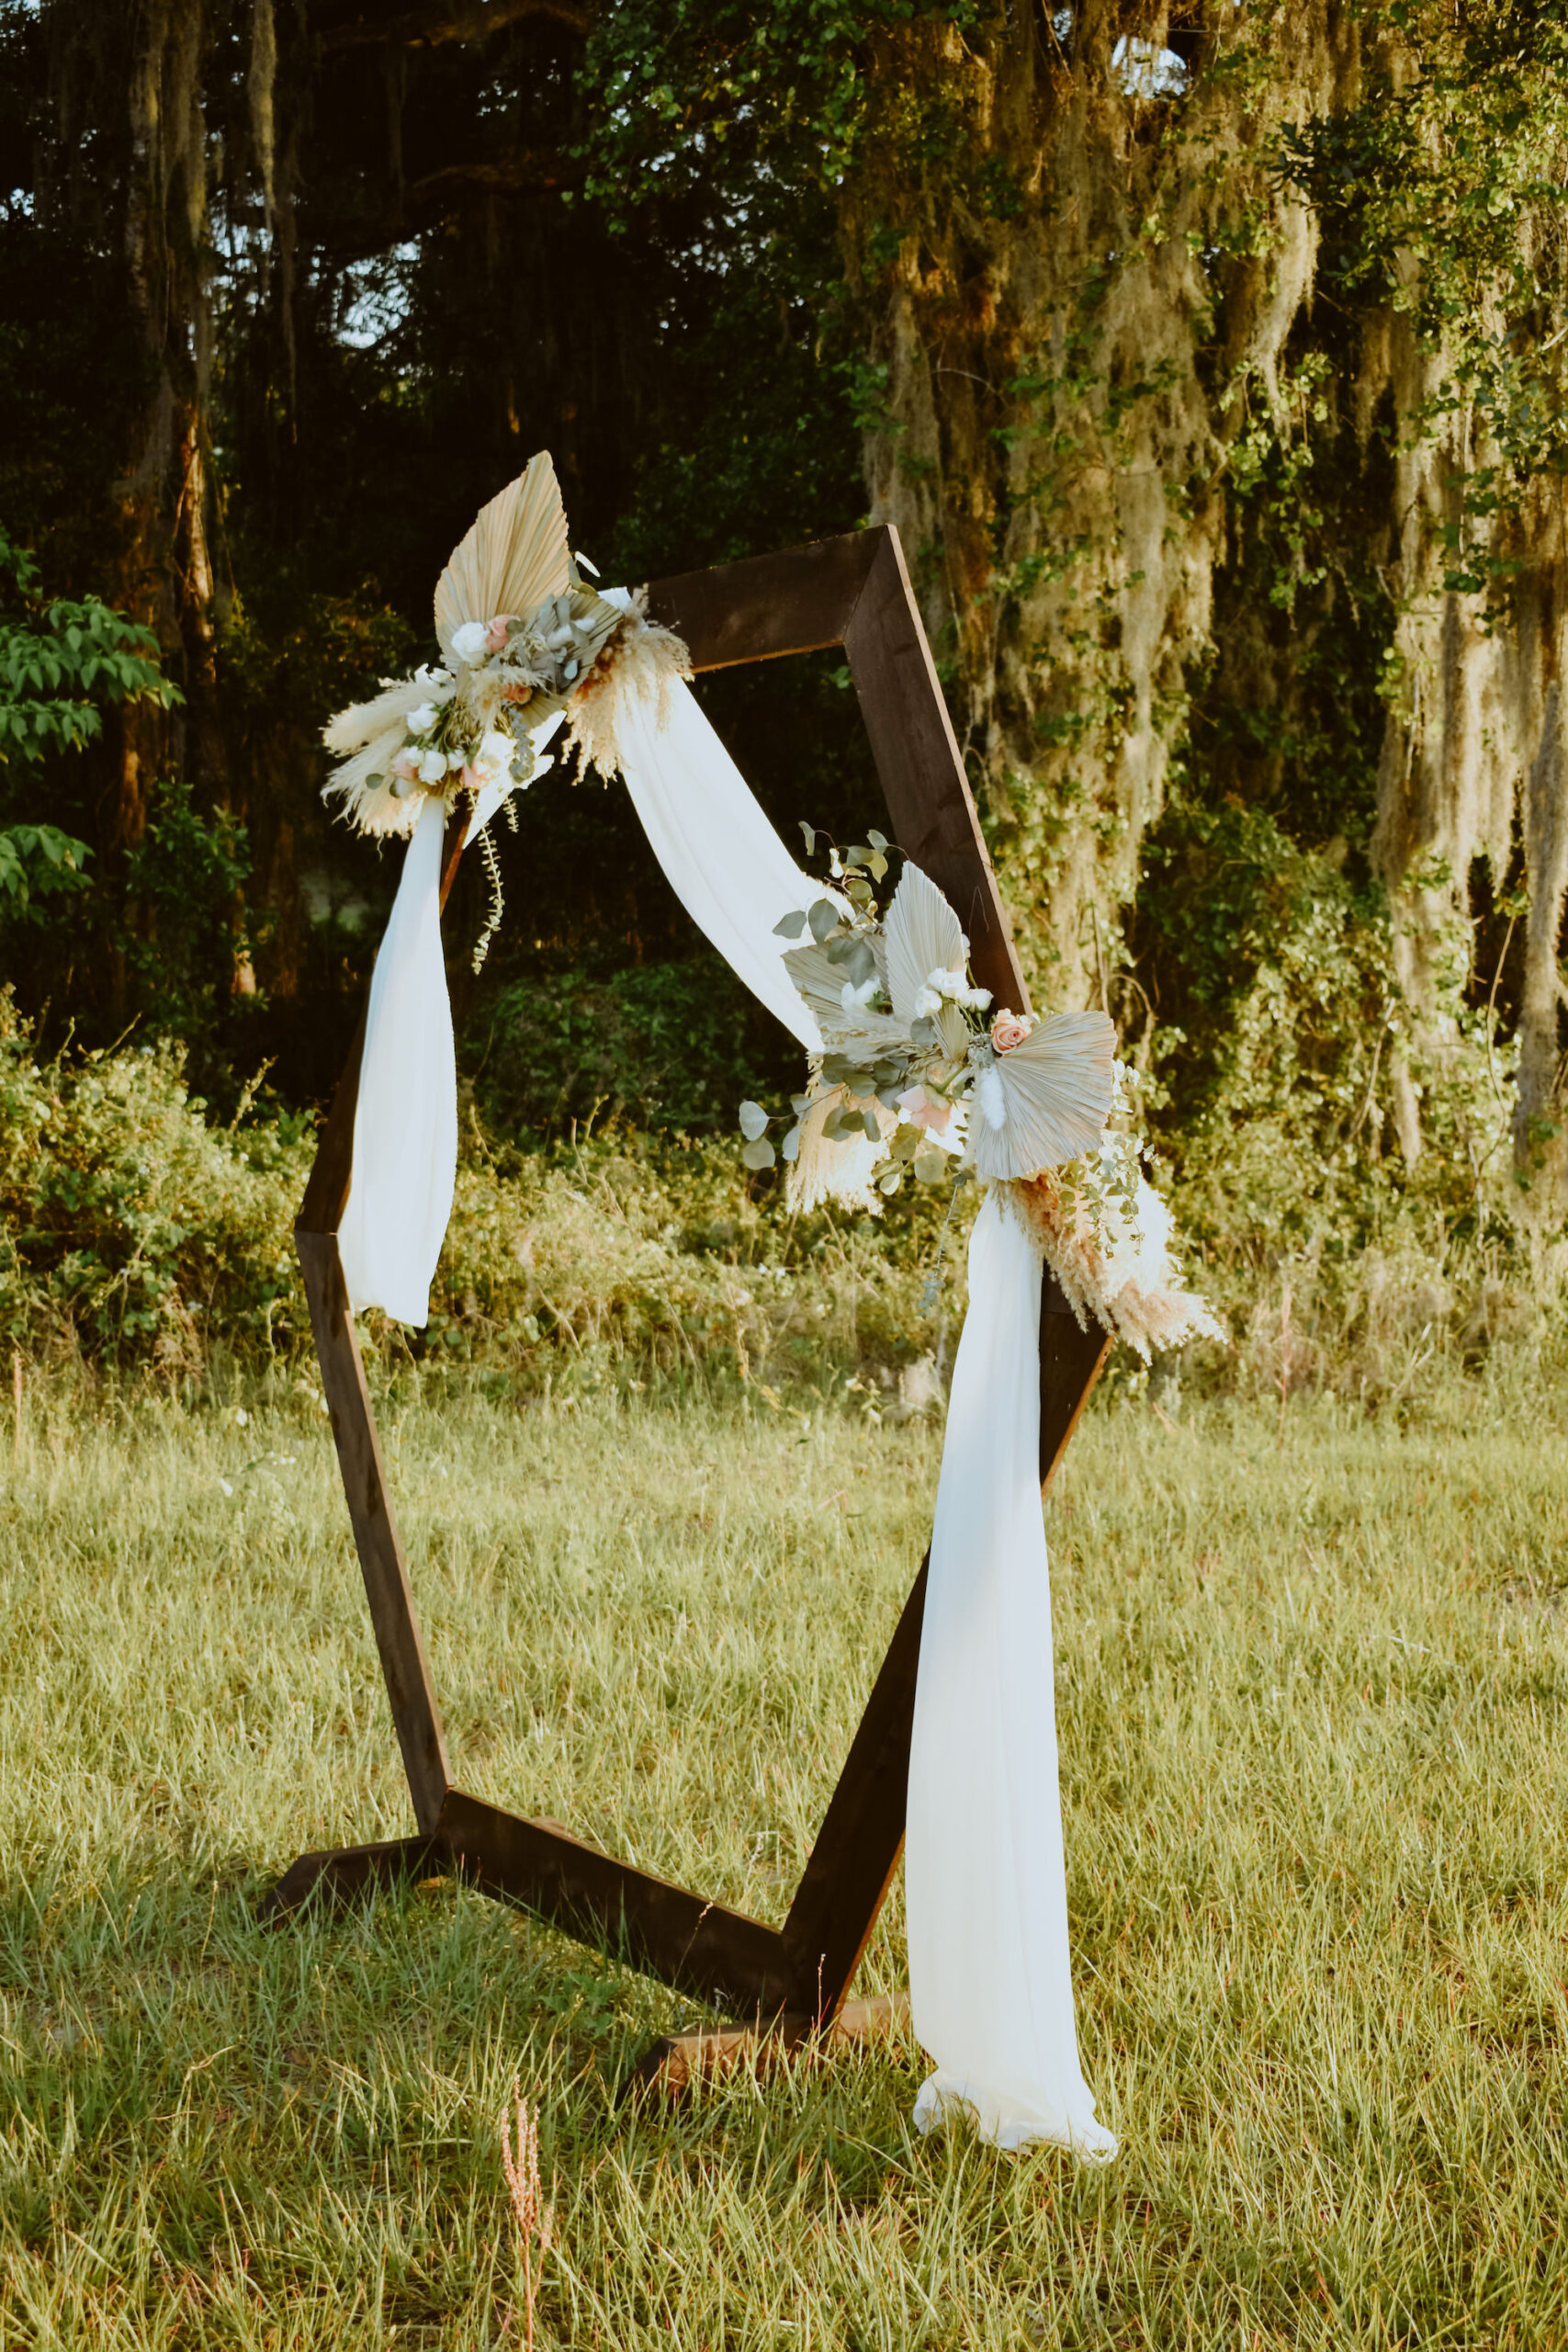 Octagon Wooden Ceremony Arch with White Draping and Dried Florals | Boho Wedding Ideas